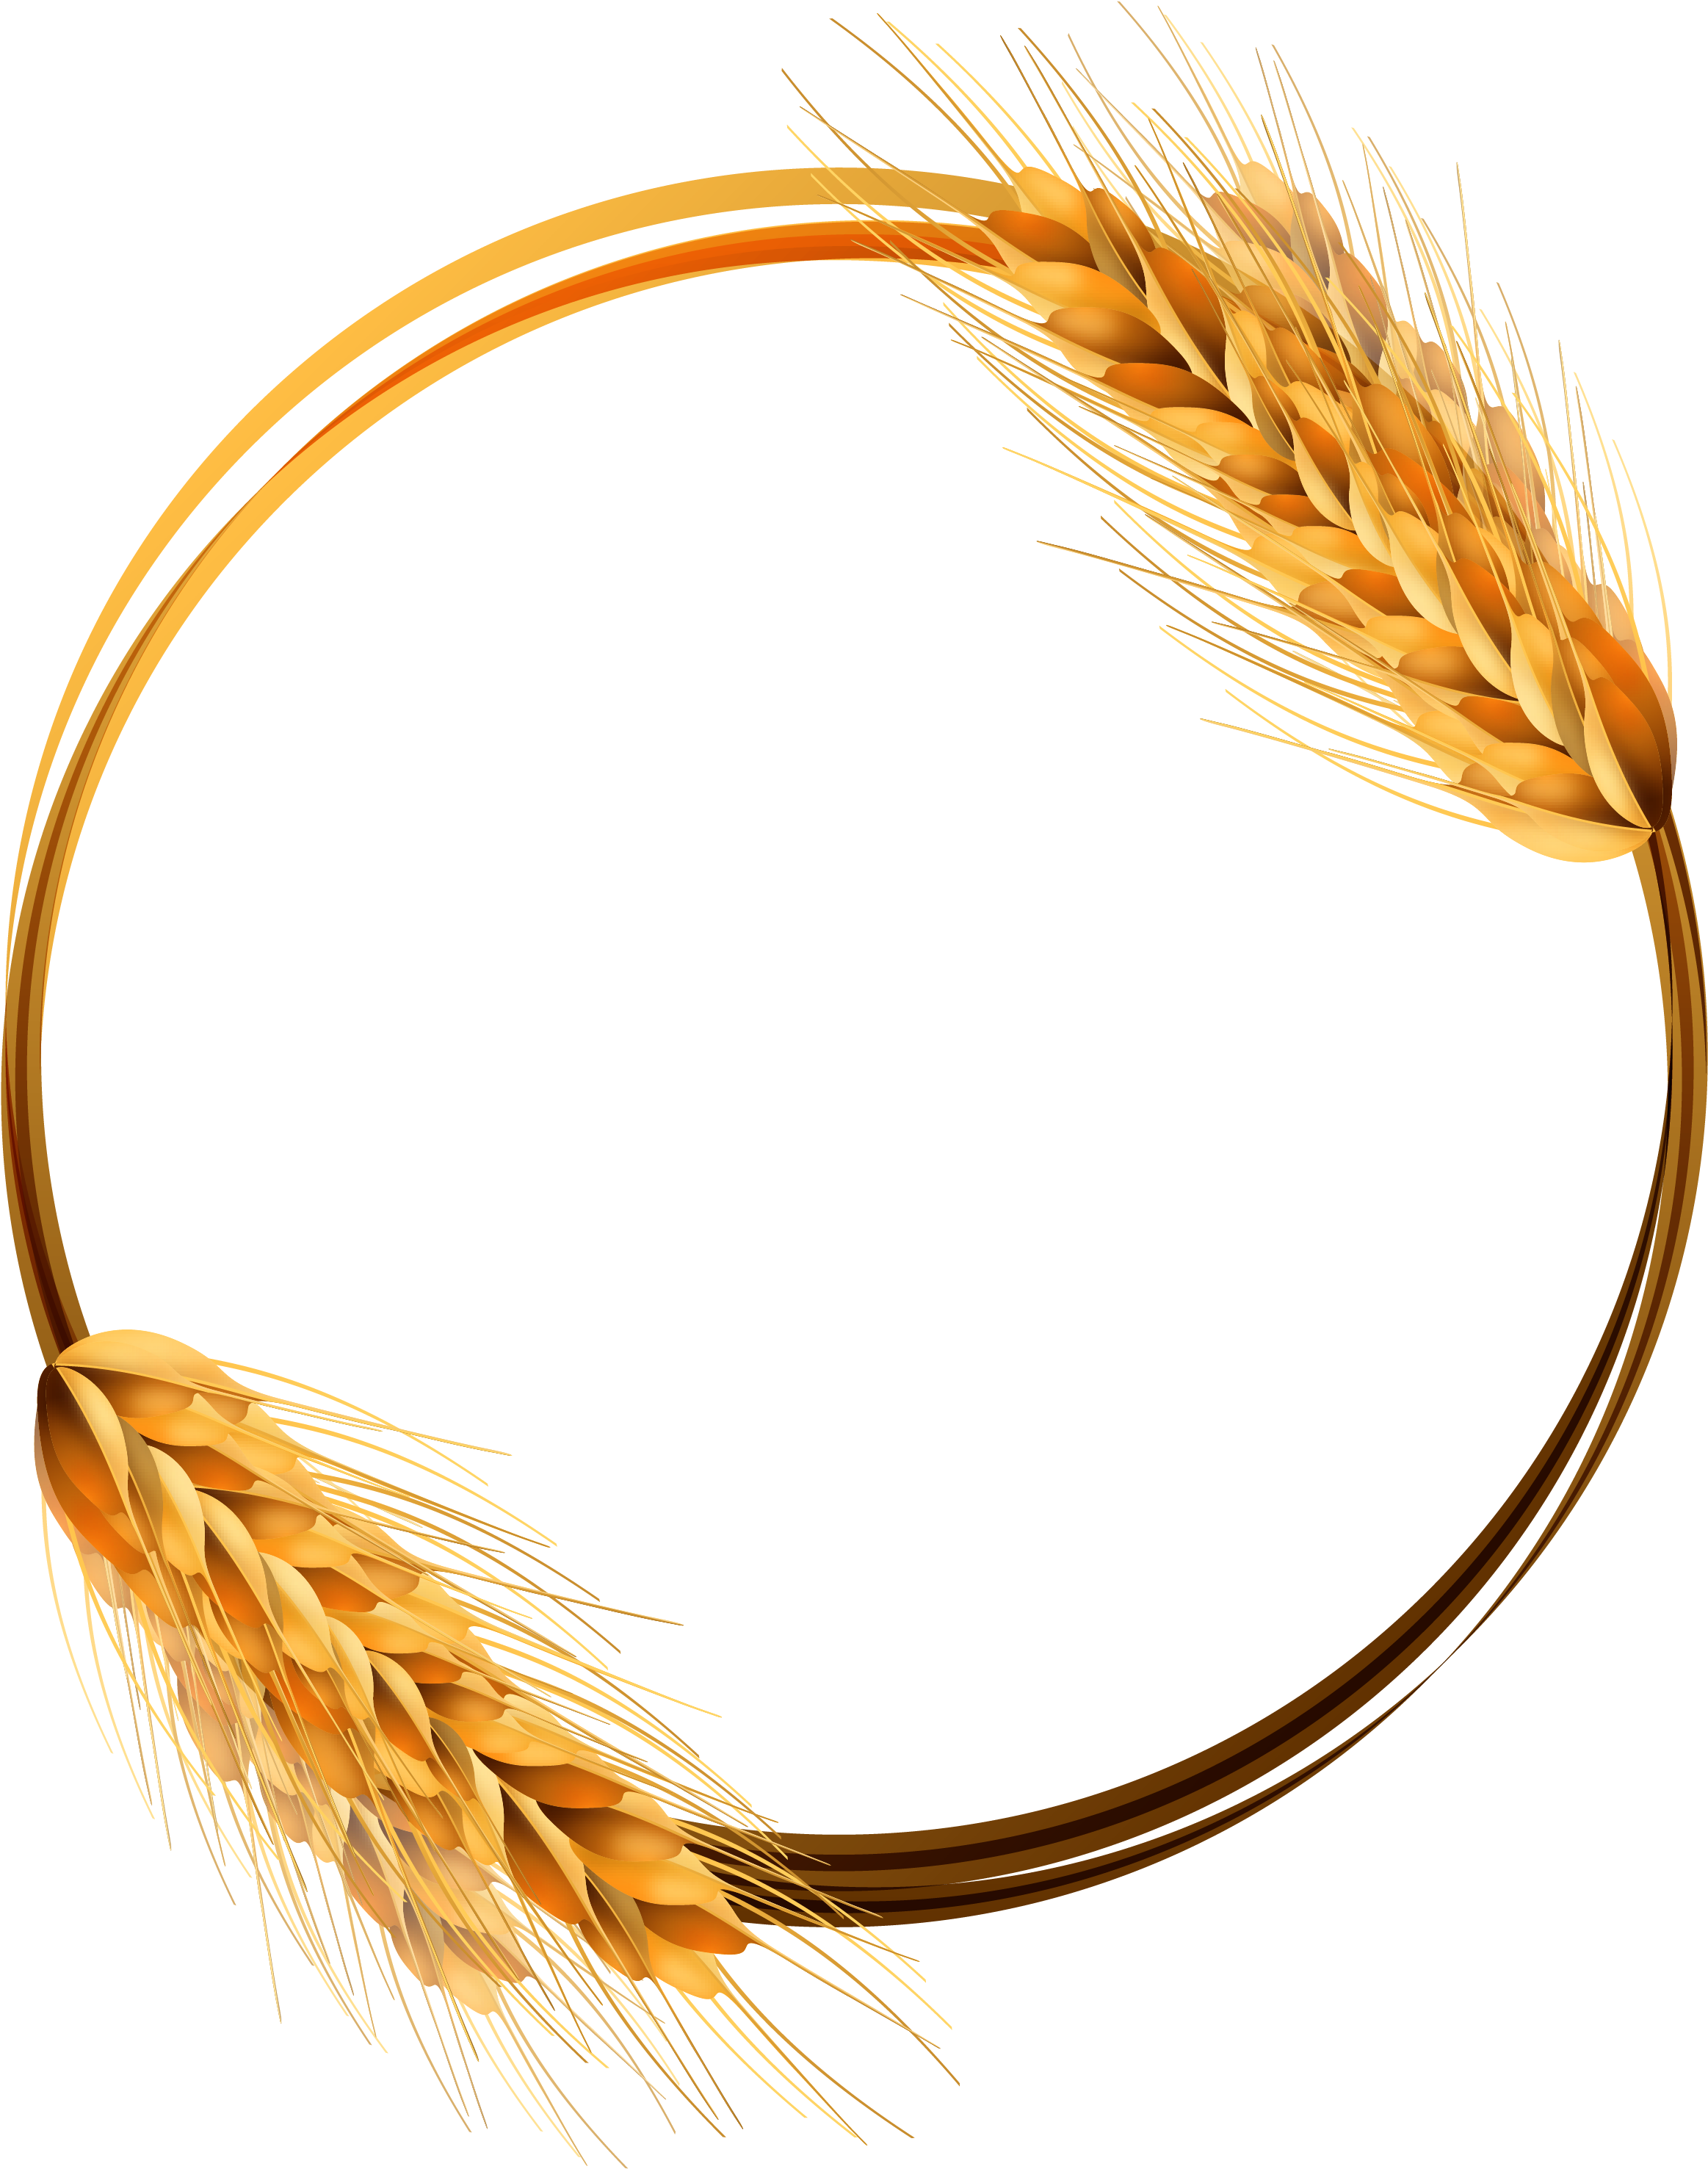 Common Wheat Ear Crop - Wheat Circle Vector Png (2533x3246)